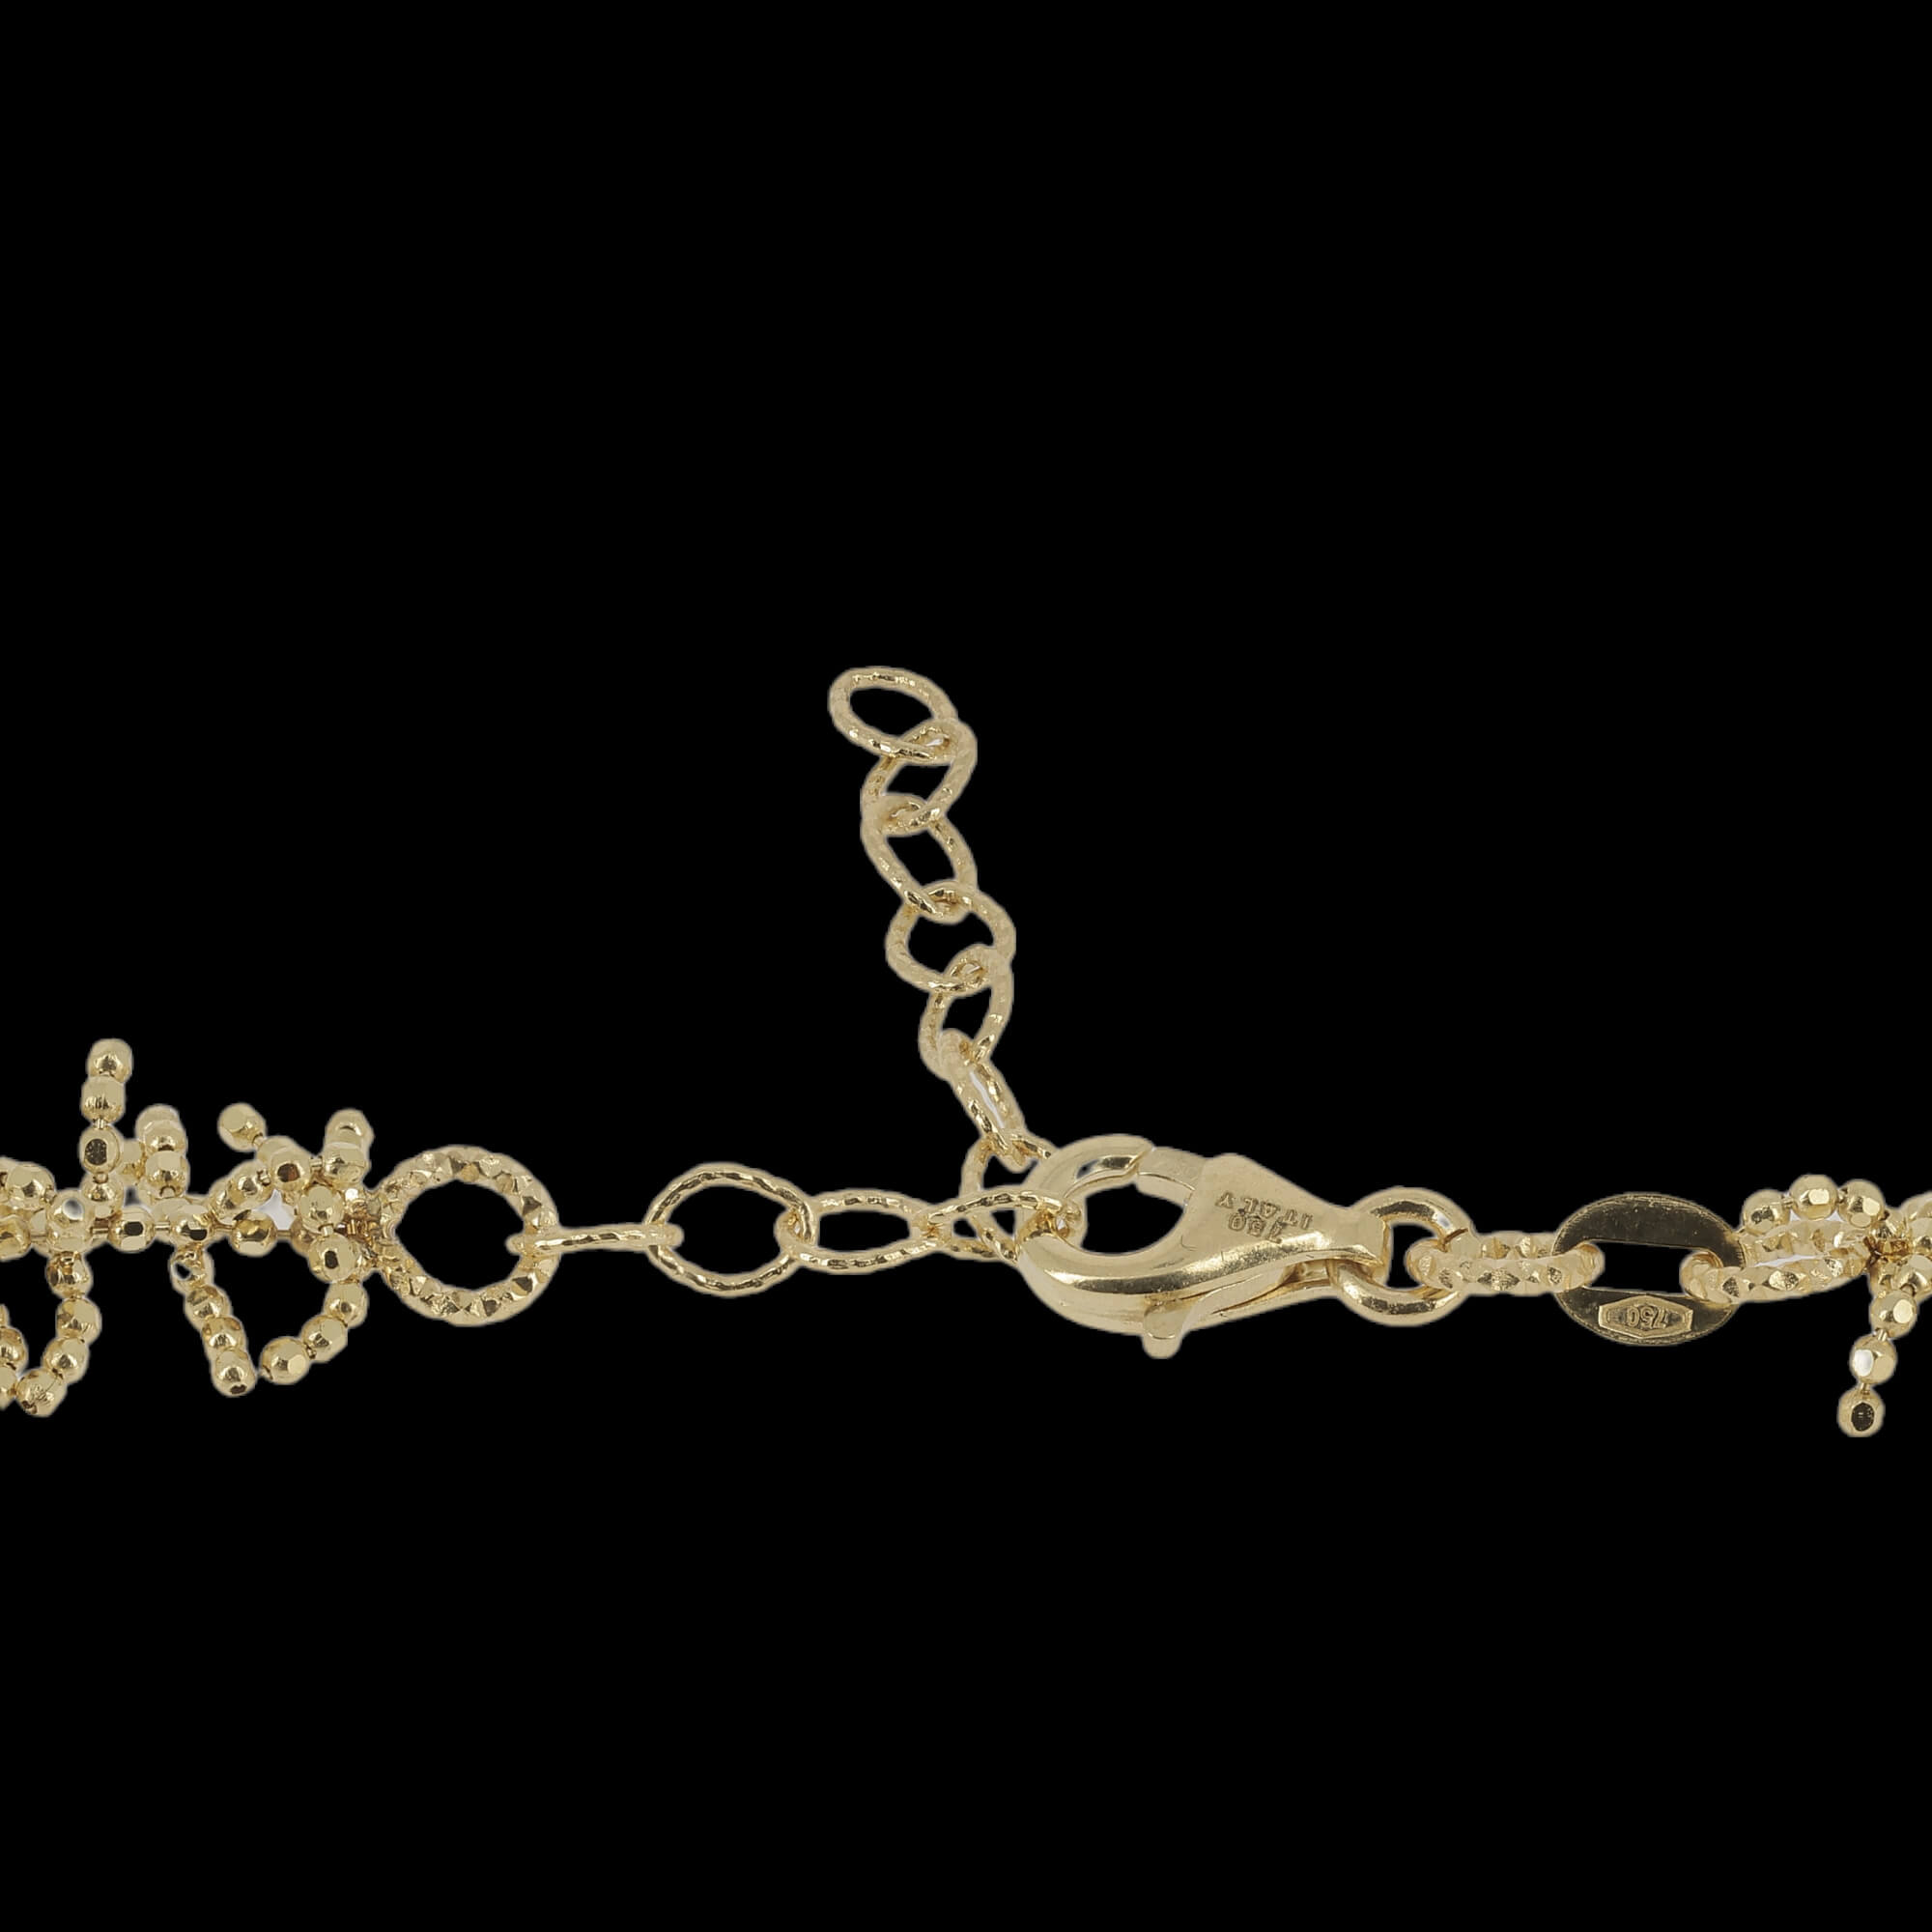 Wider bracelet with refined branches of 18ct gold